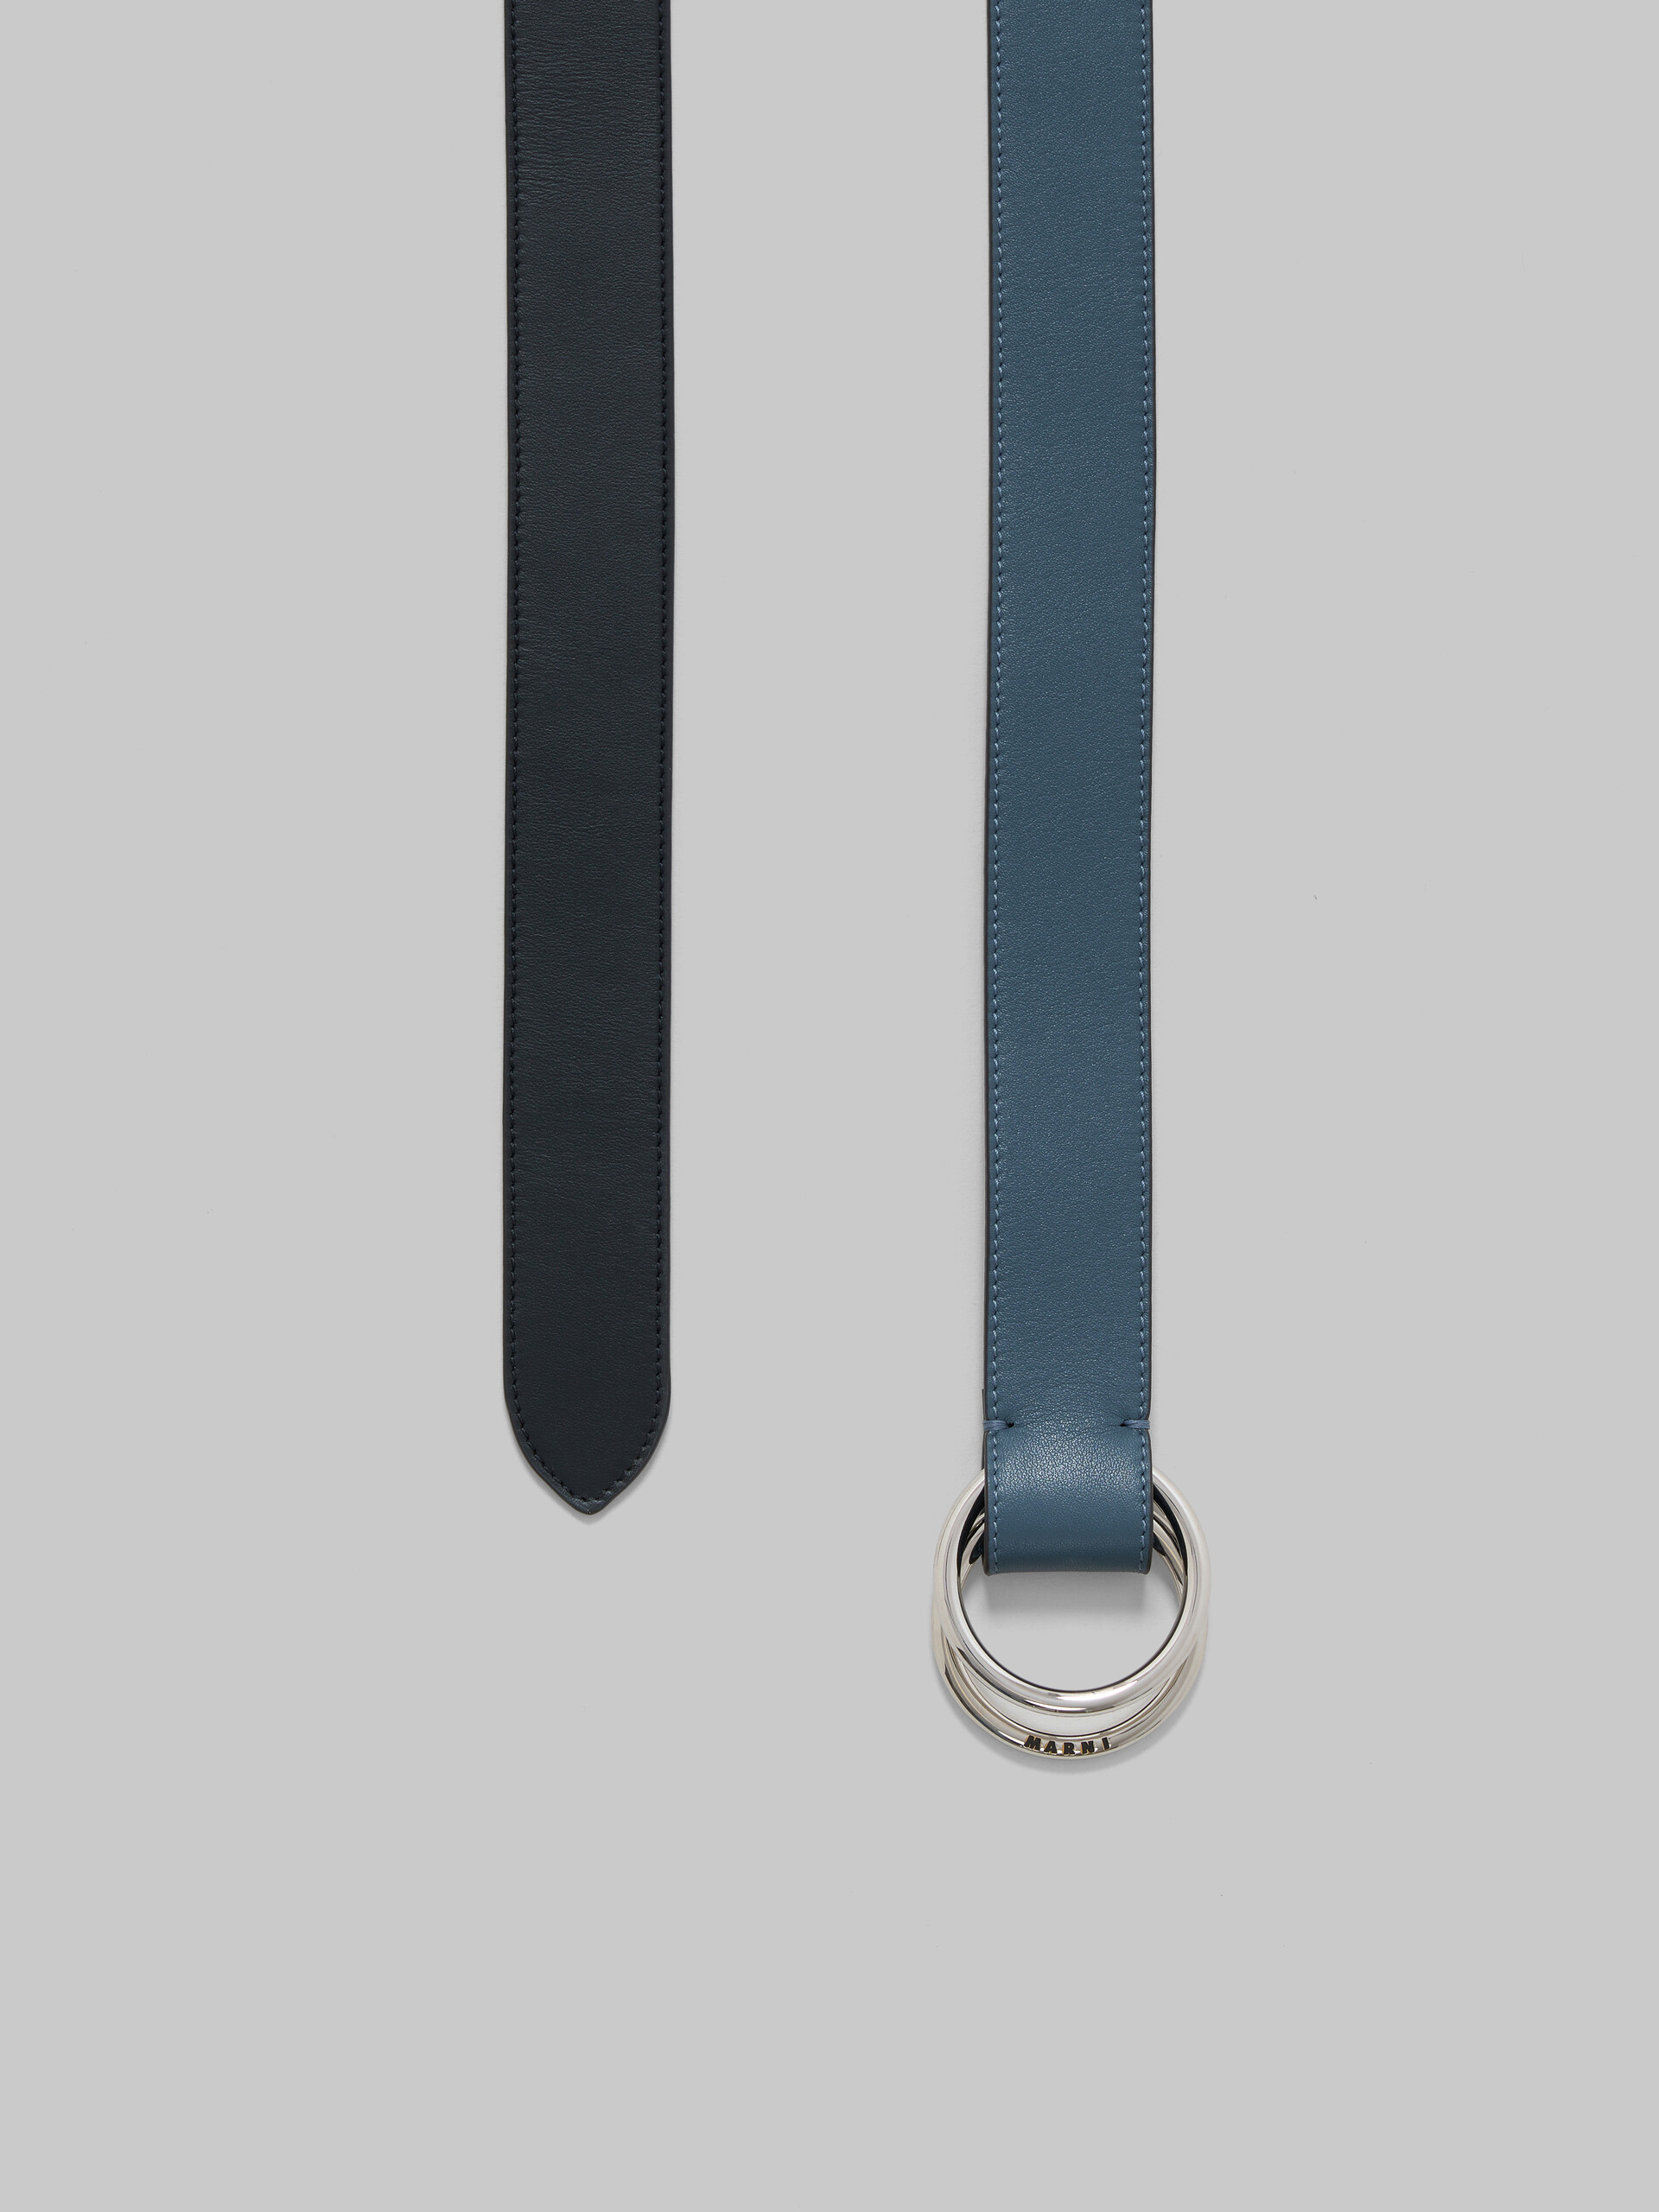 Black and blue leather belt with ring buckle - Belts - Image 3